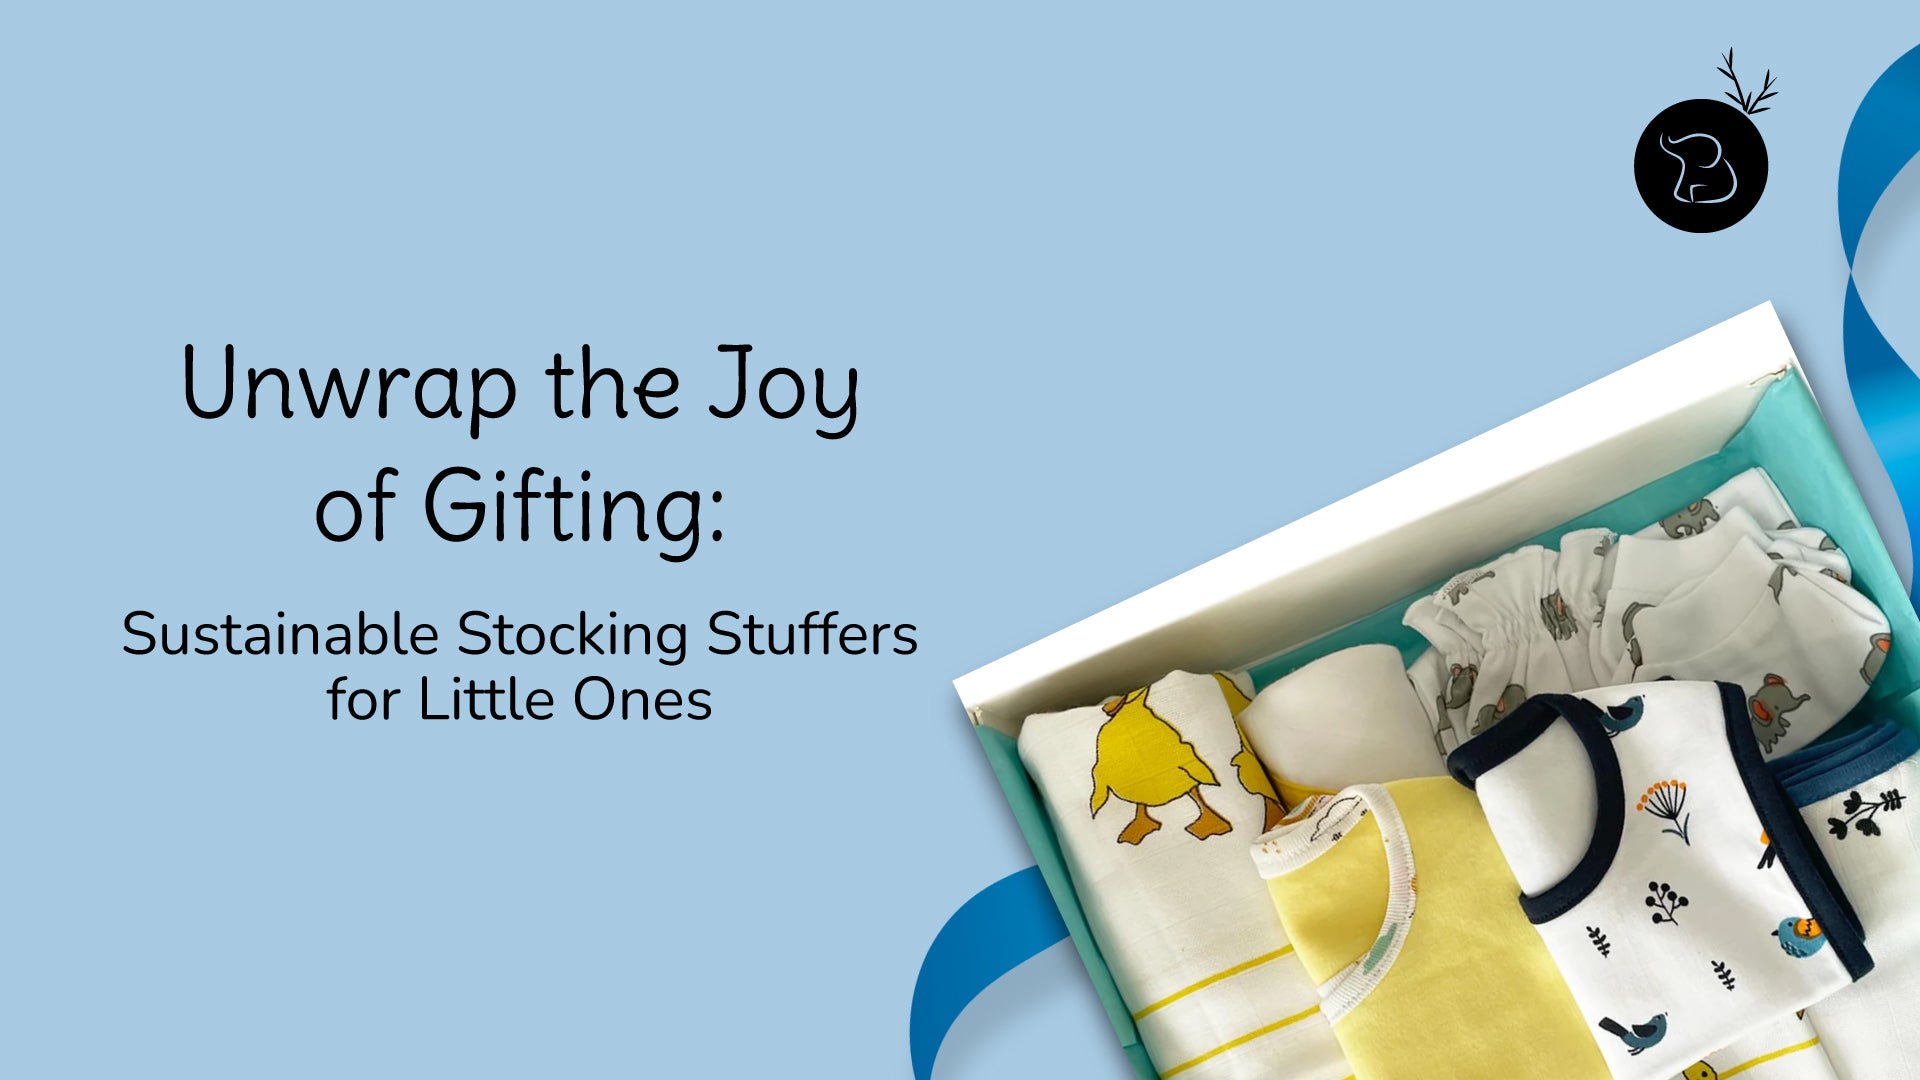 Unwrap the Joy of Gifting: Sustainable Stocking Stuffers for Little Ones